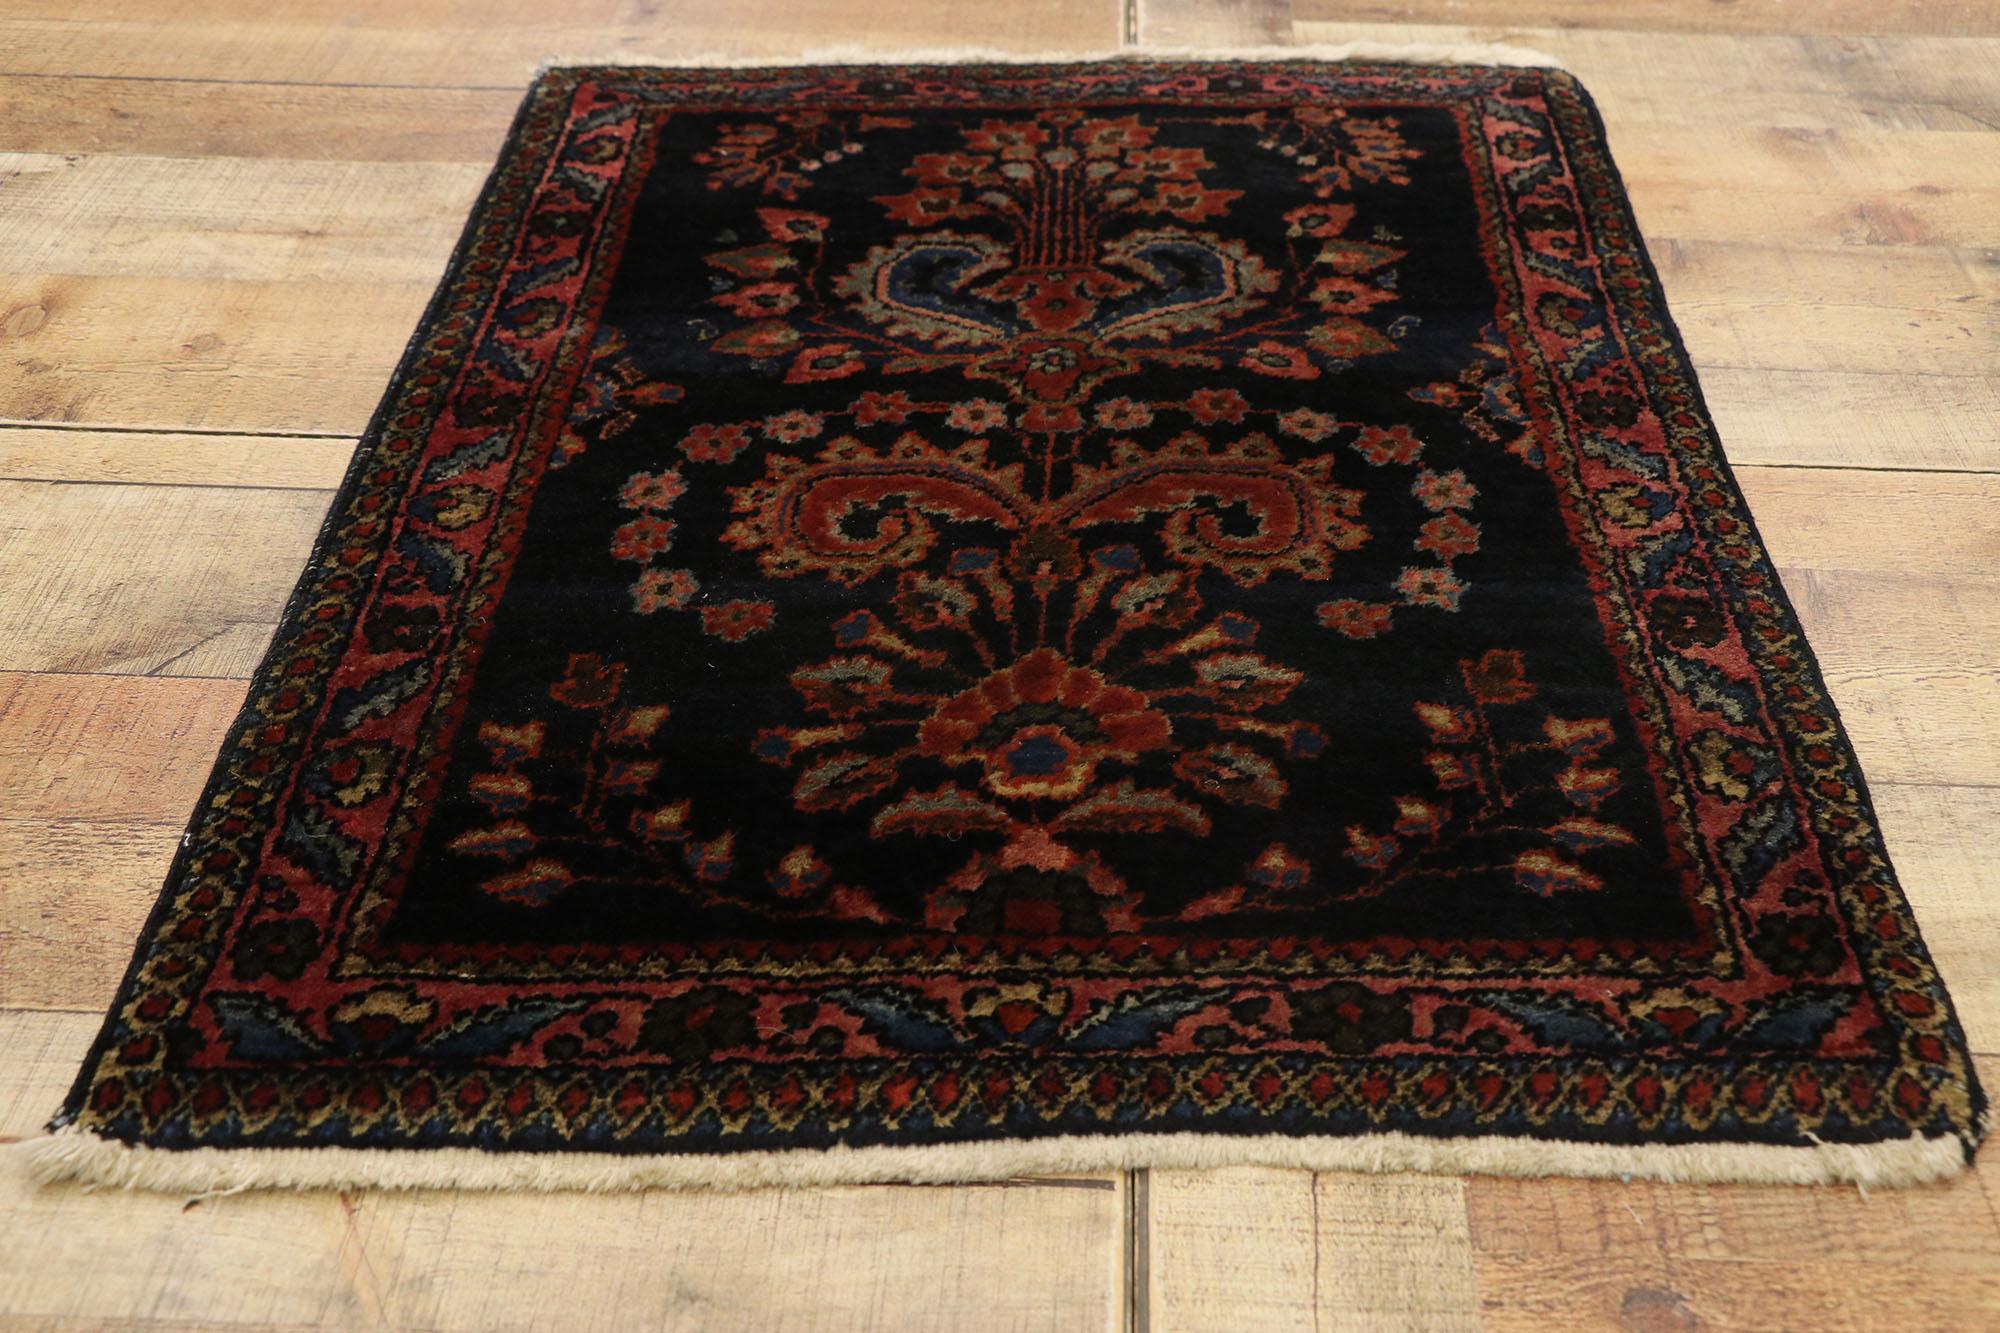 20th Century Antique Persian Mohajeran Sarouk Rug with Old World Victorian Style For Sale